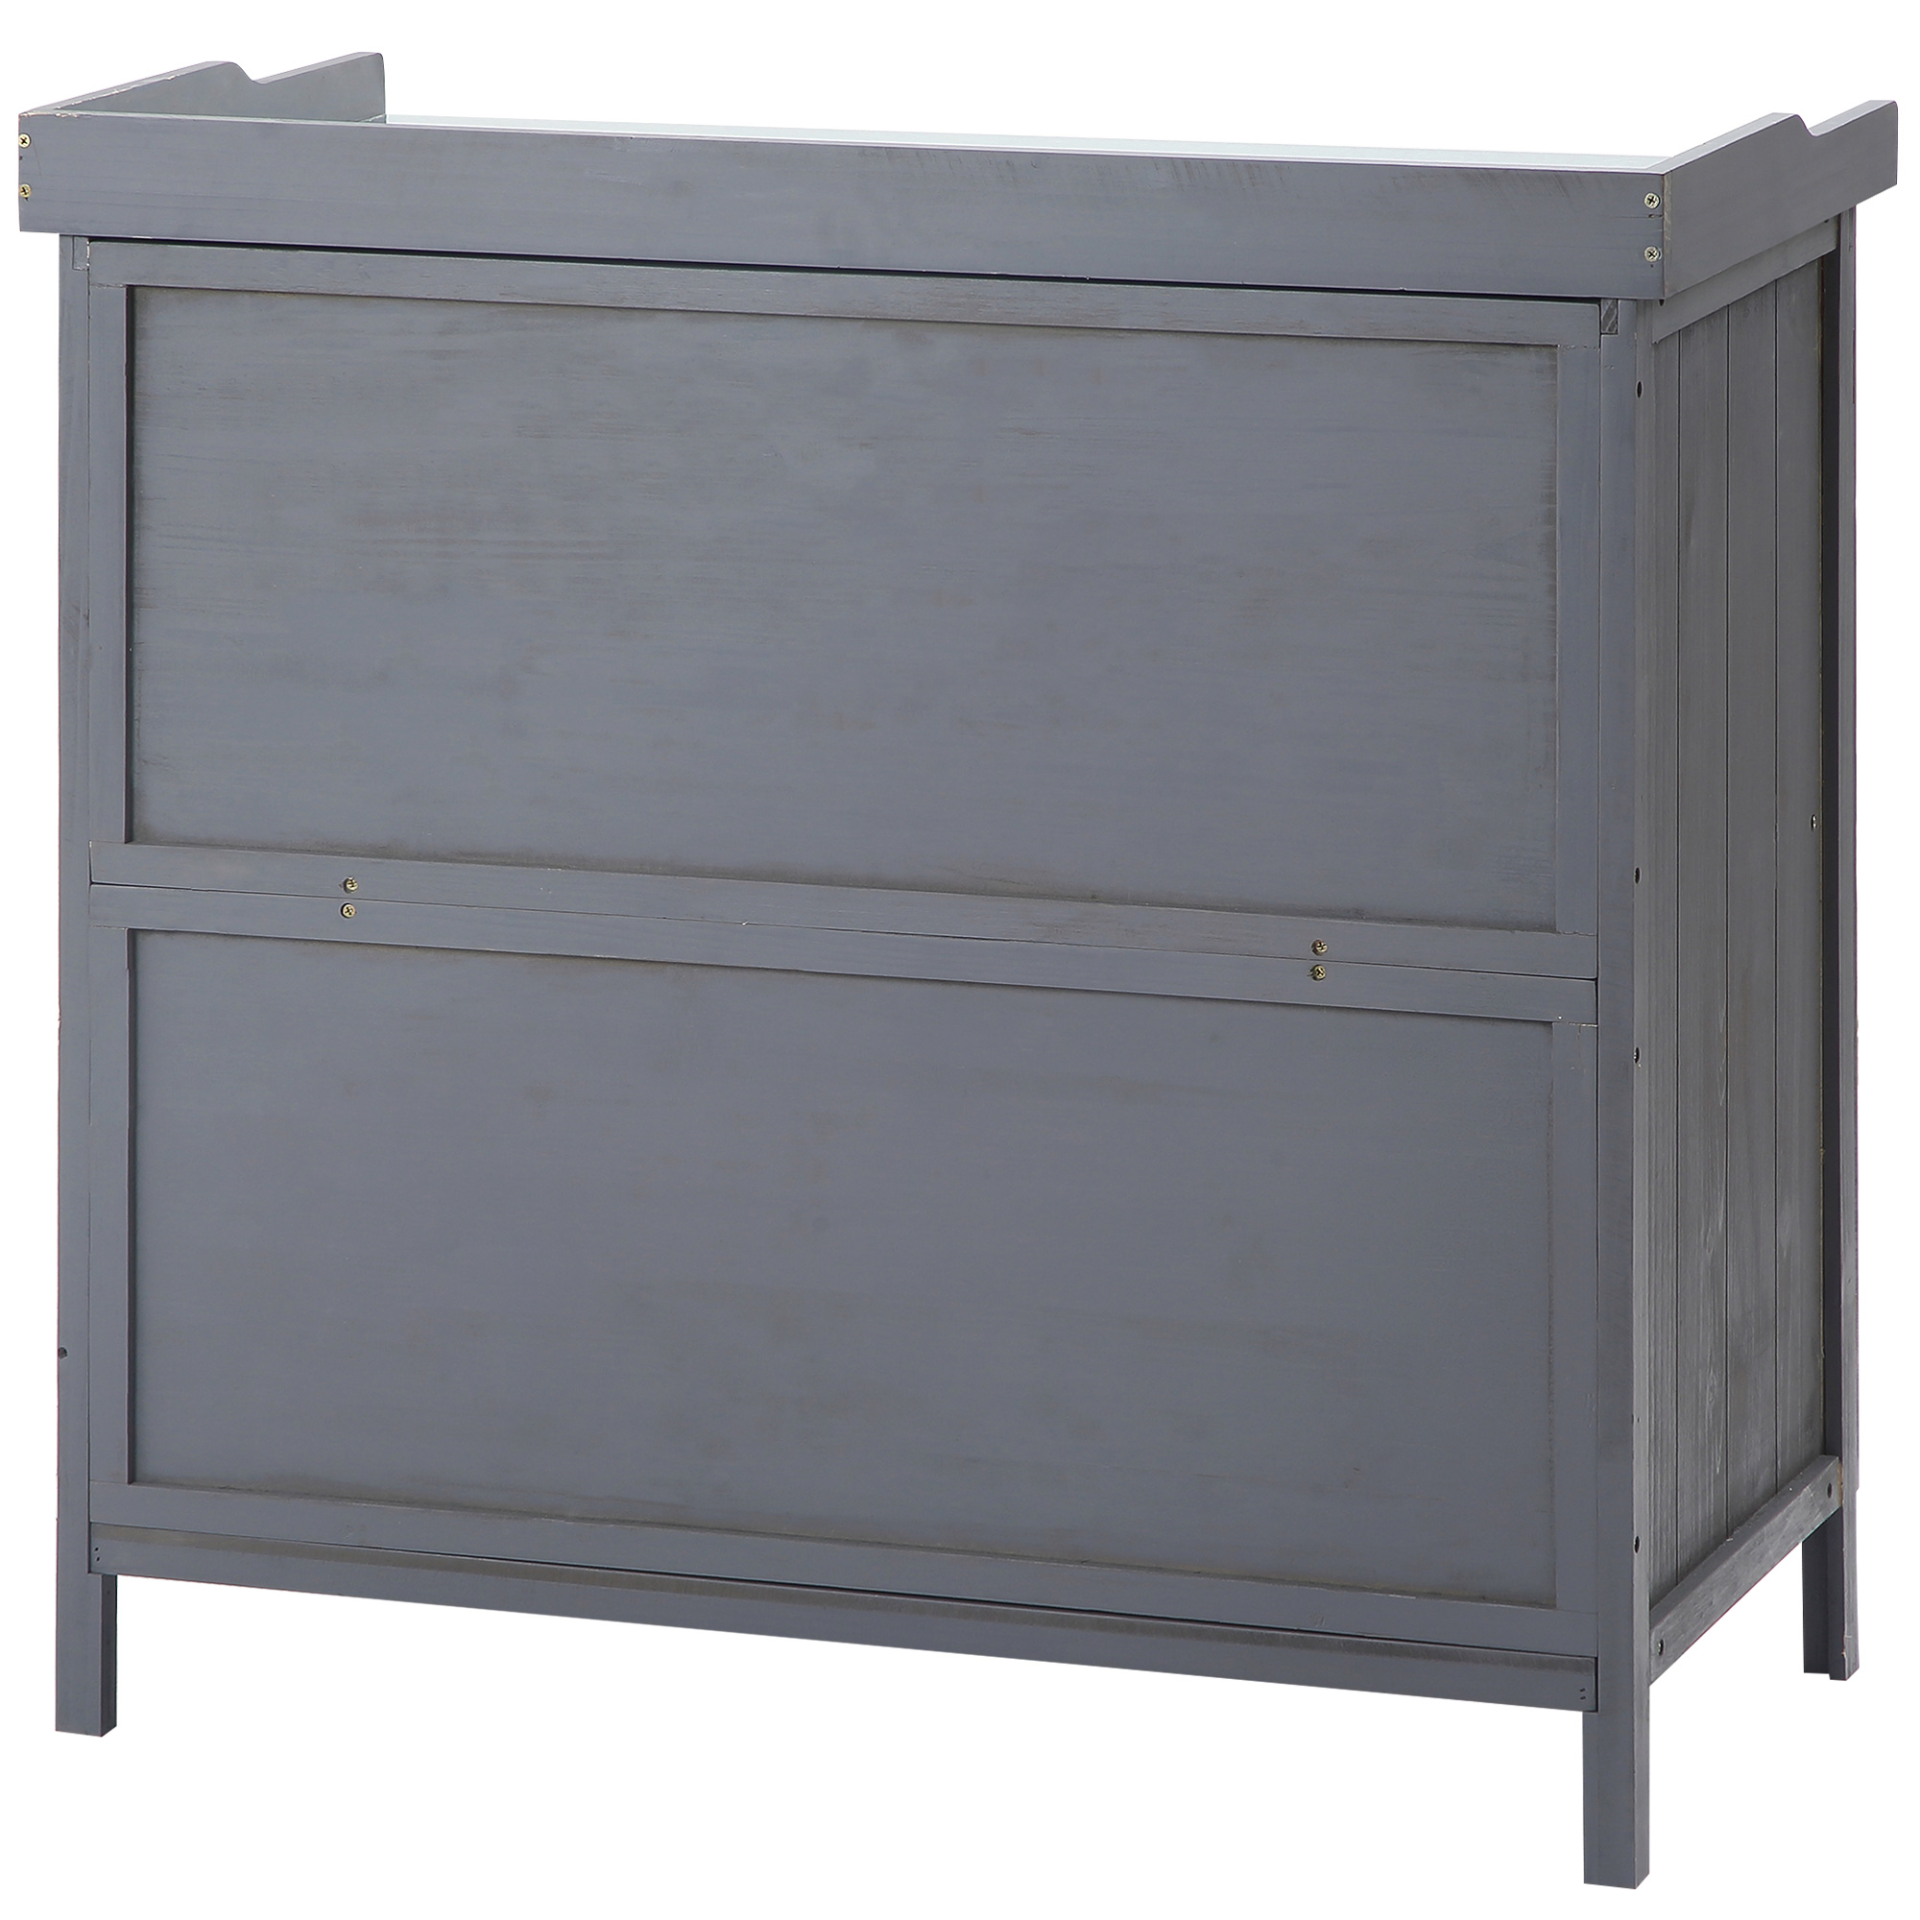 Outsunny Garden Storage Cabinet, Outdoor Tool Shed, Potting Bench Table with Galvanized Top and Two Shelves for Yard Tools or Pool Accessories, Grey